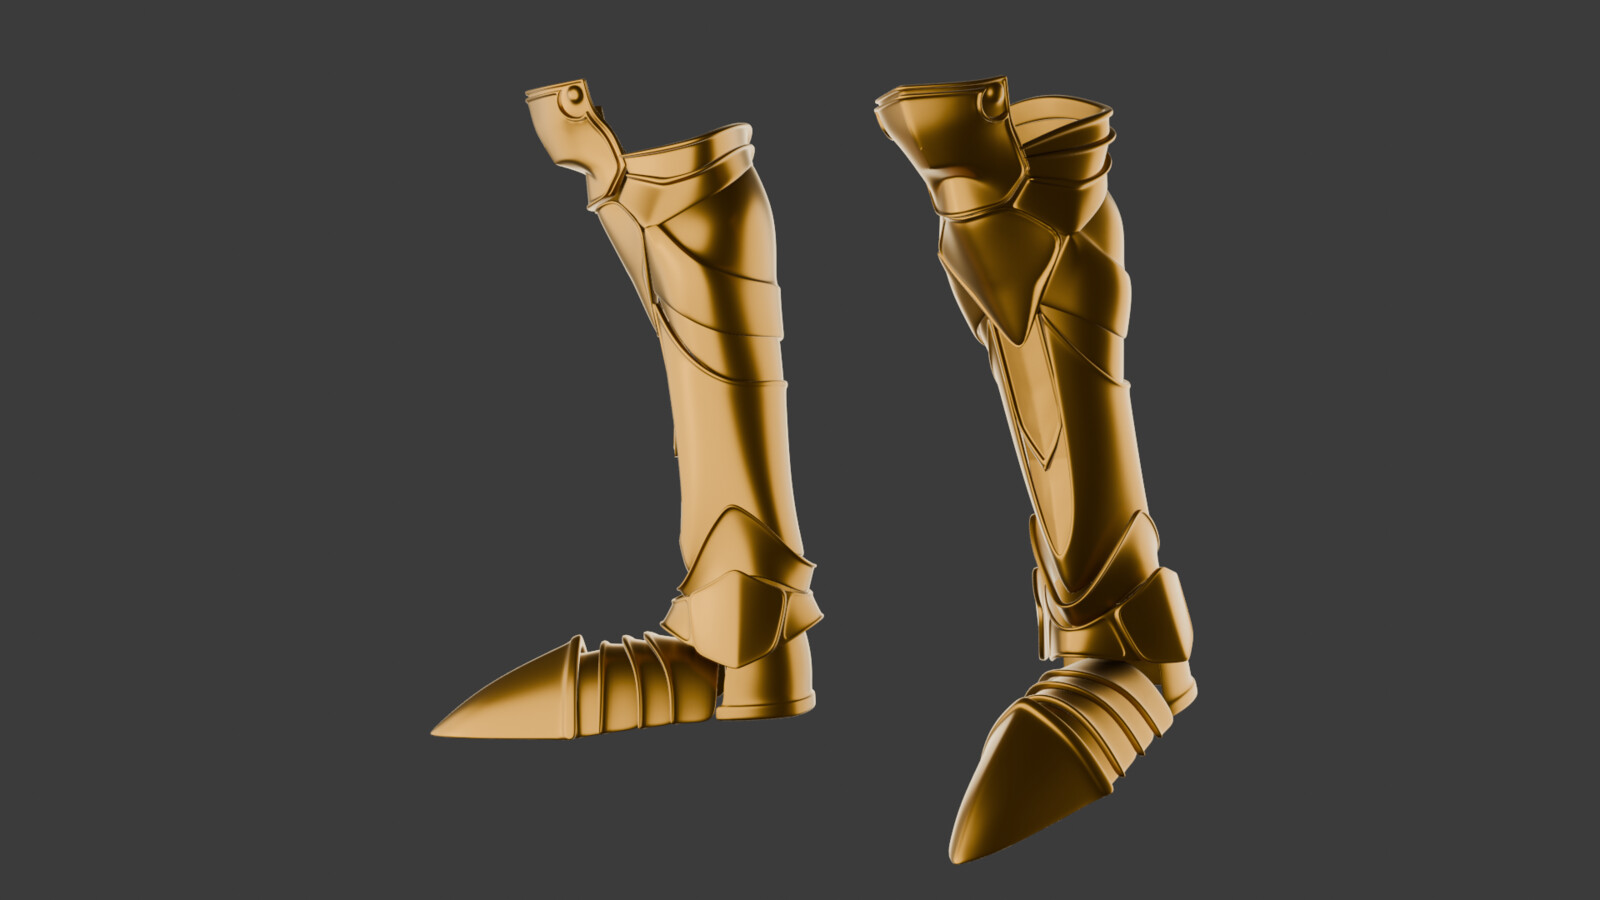 Final render of boots with basic texturing to bring out details